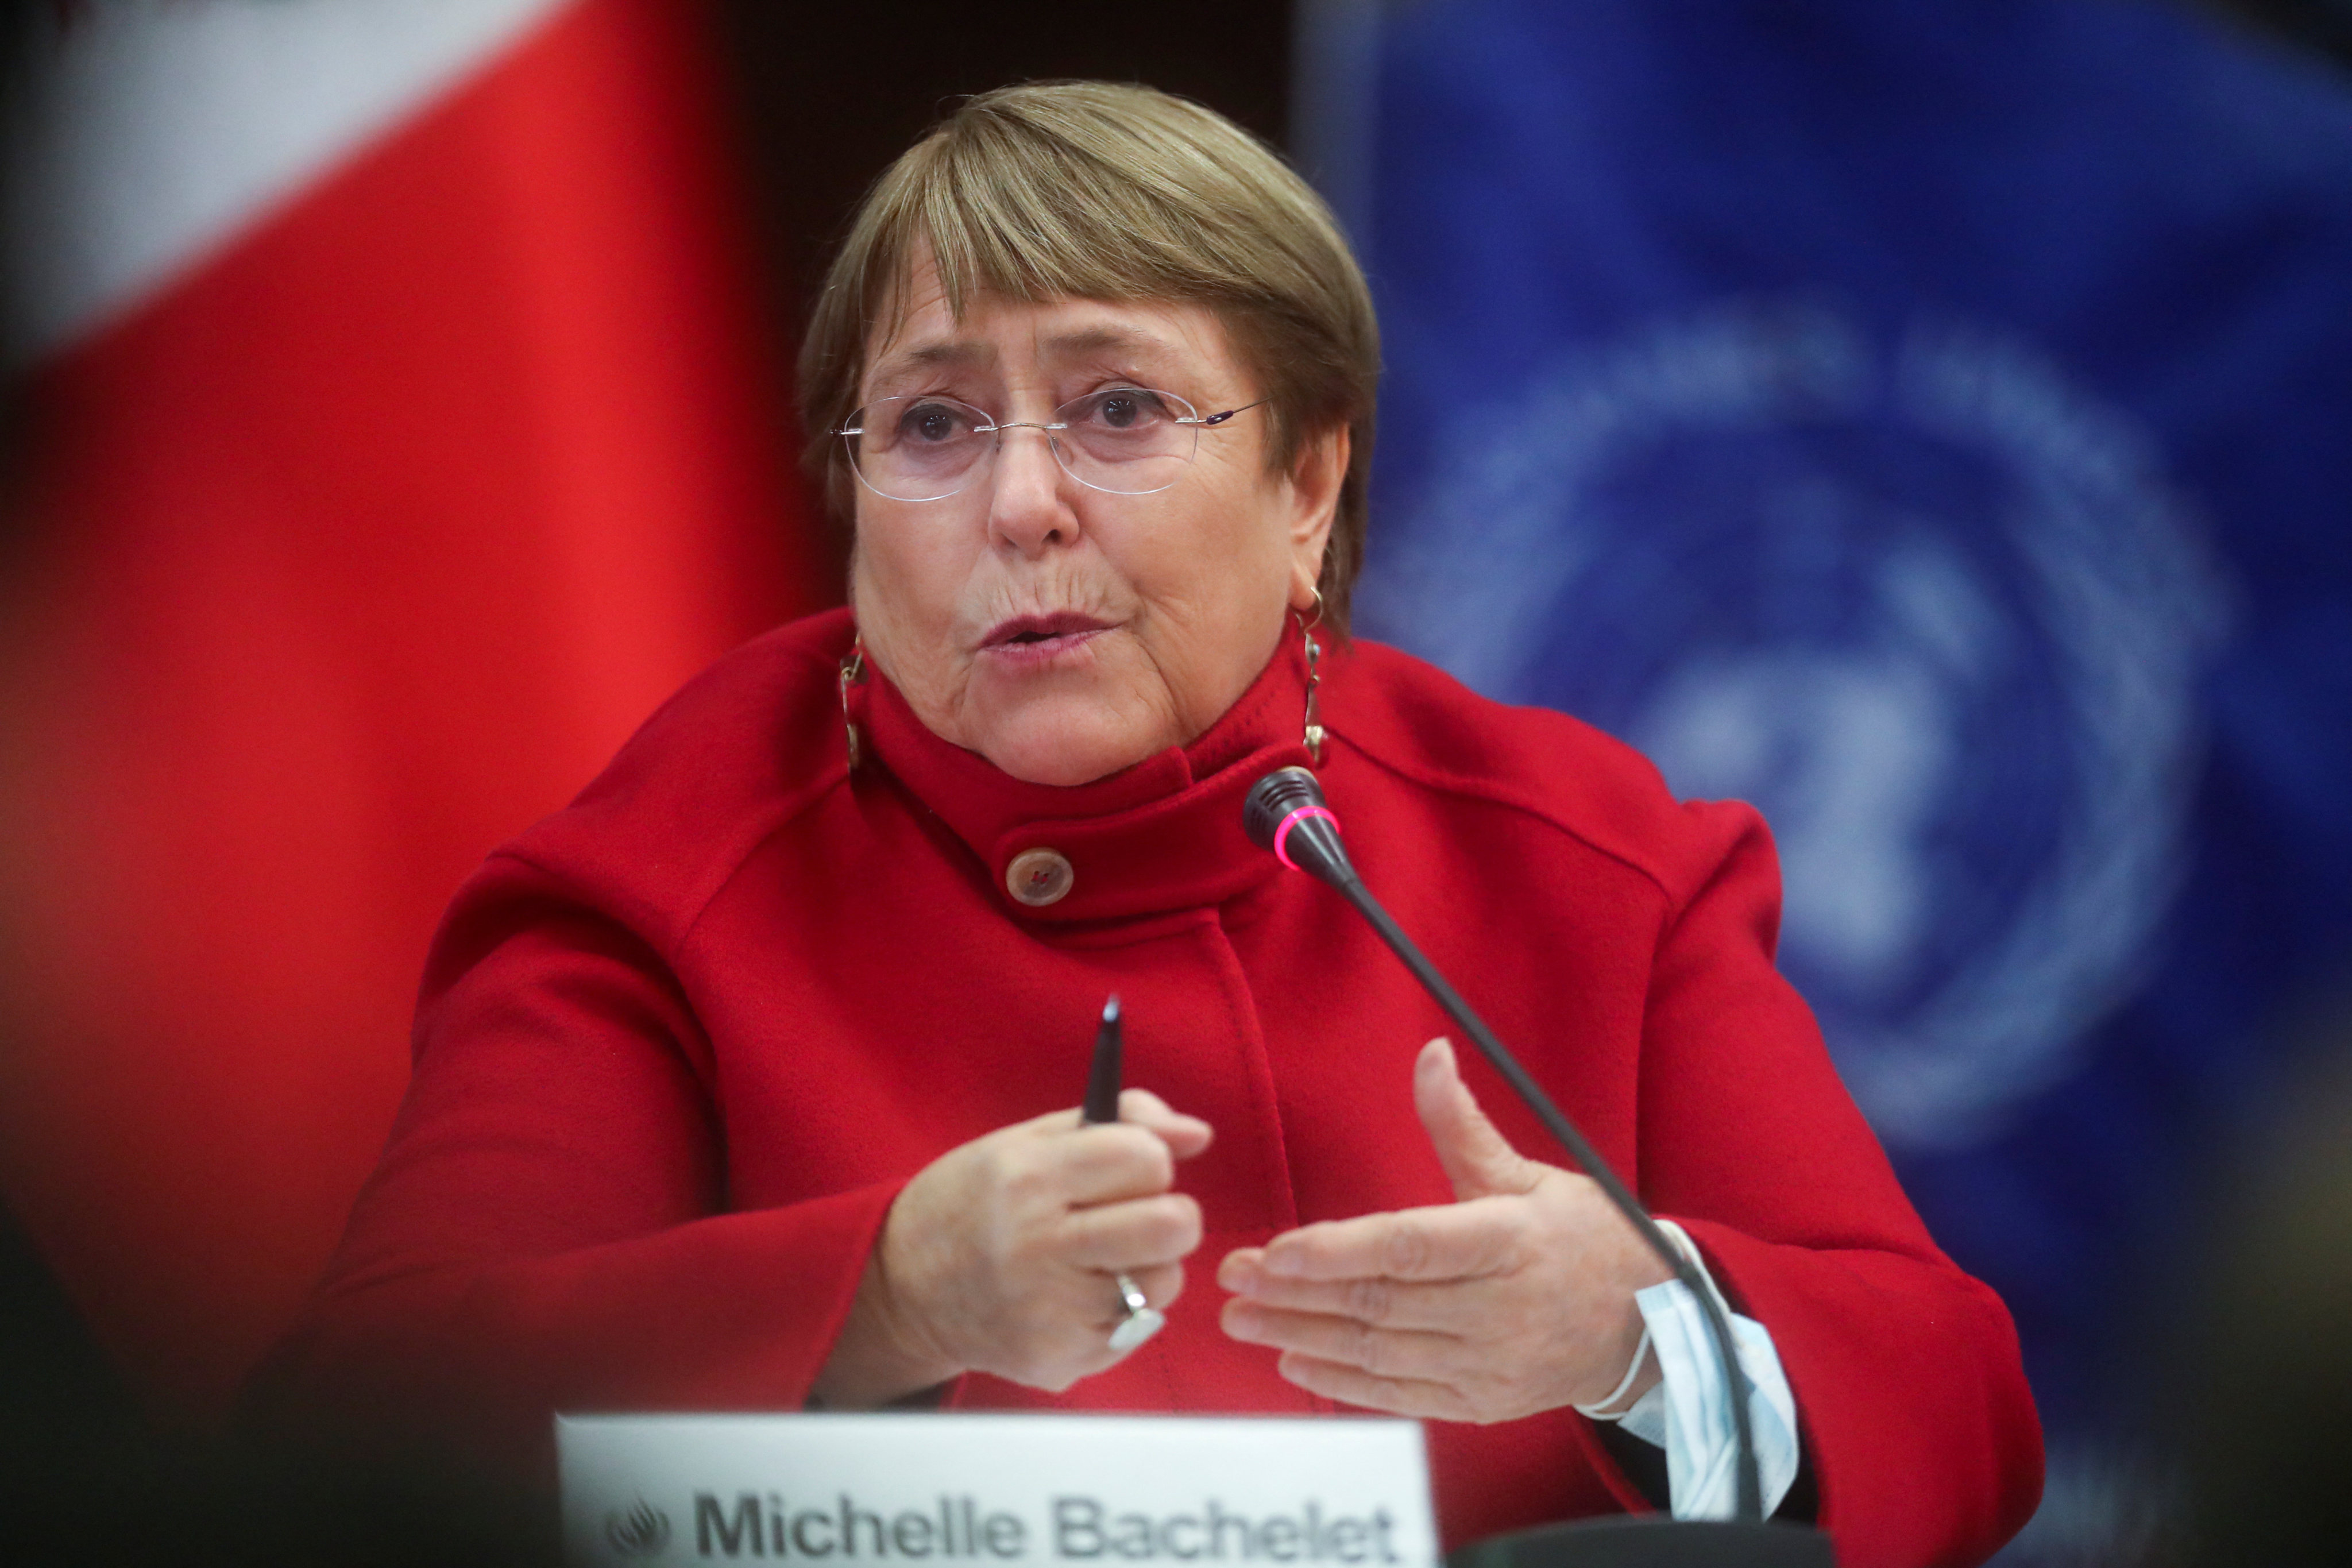 UN human rights chief Michelle Bachelet addressing the media on Wednesday in Lima, Peru. Bachelet has faced fierce criticism for her trip to Xinjiang in western China in May. Photo: Reuters